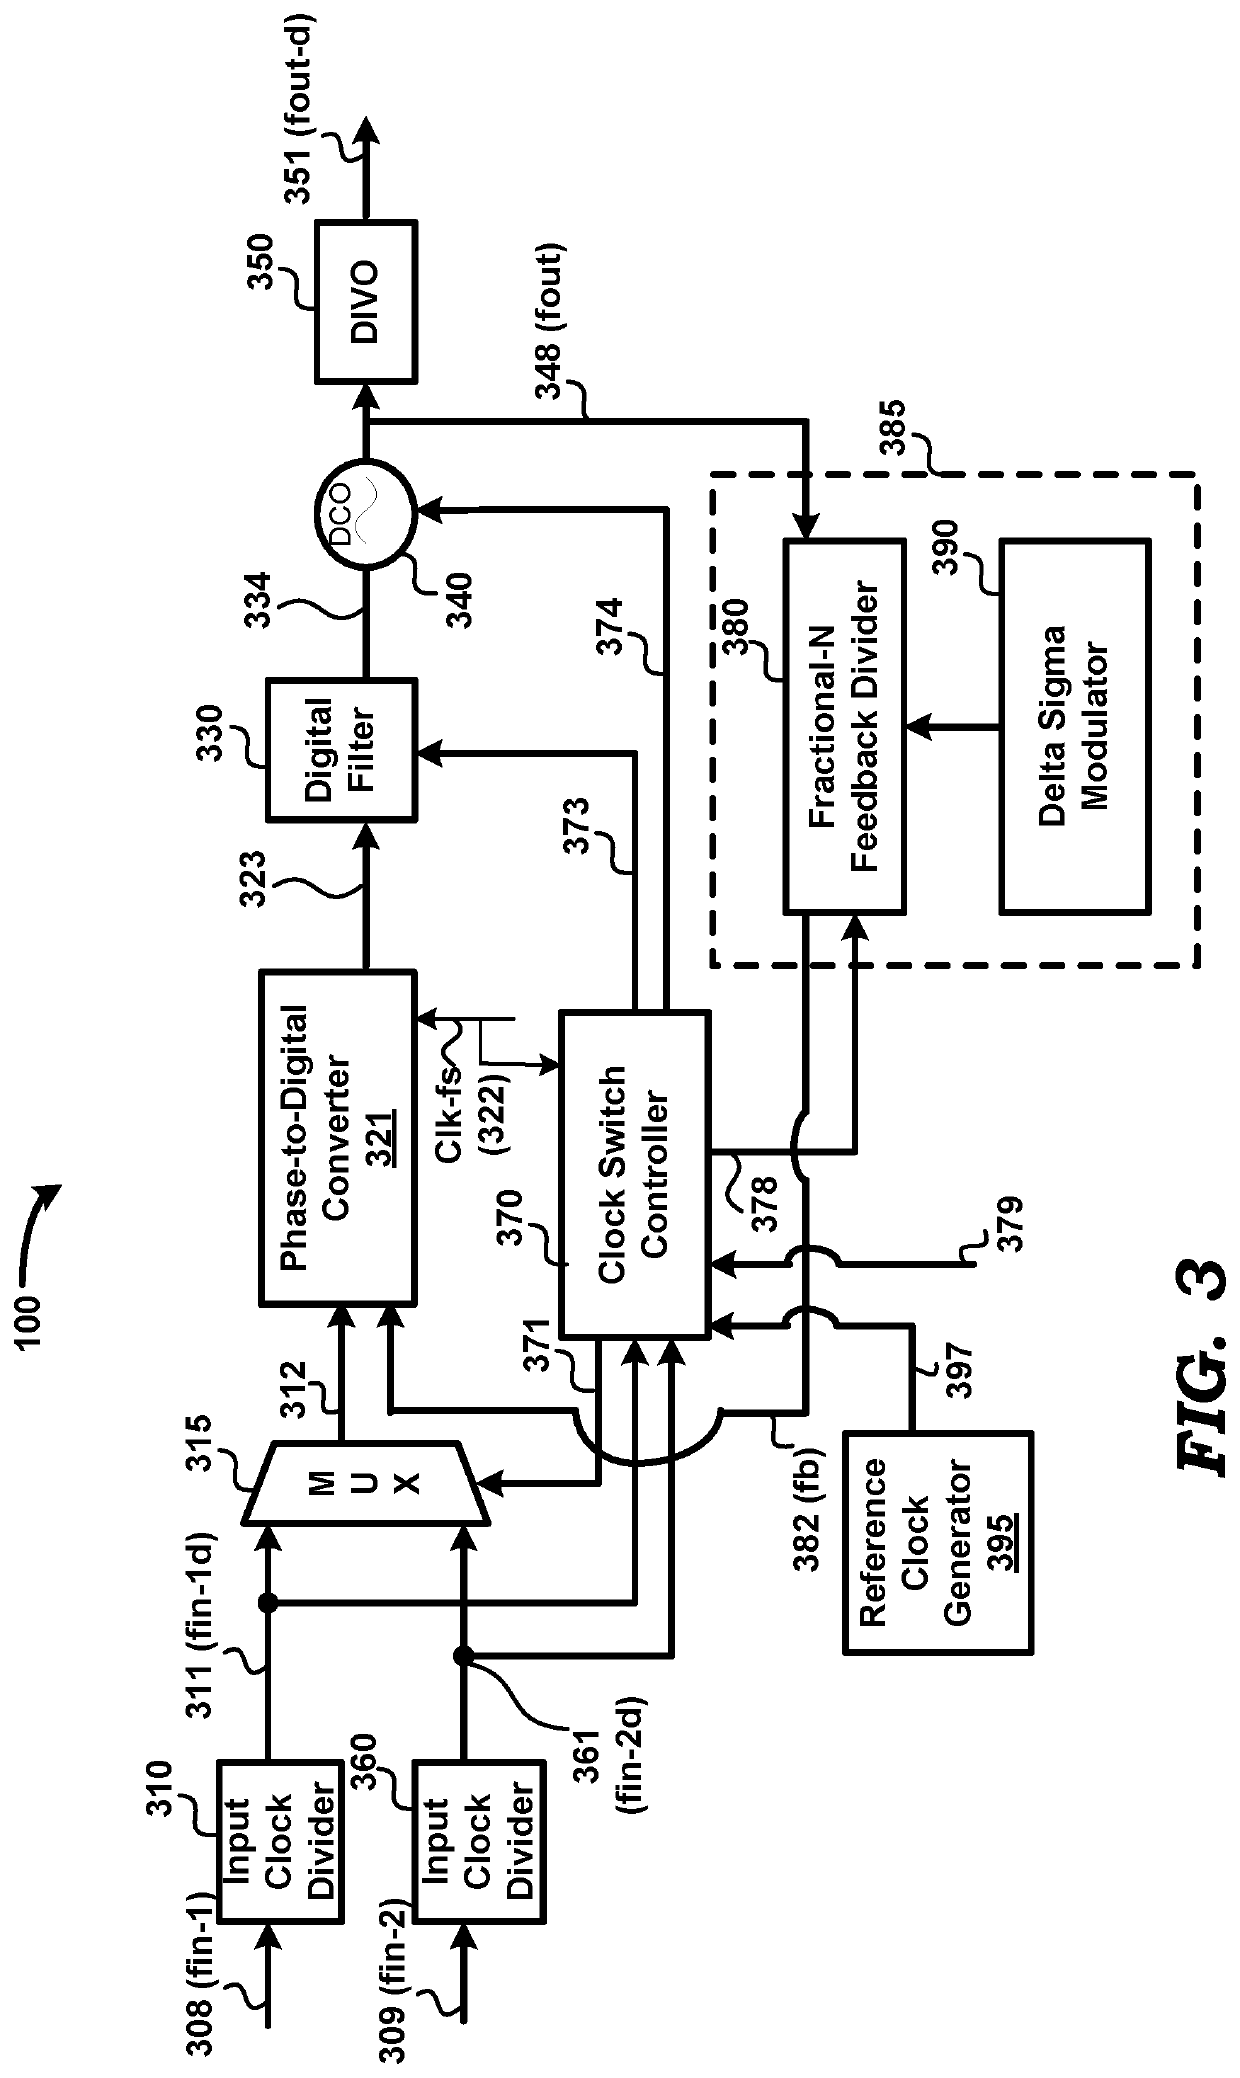 Hitless switching when generating an output clock derived from multiple redundant input clocks